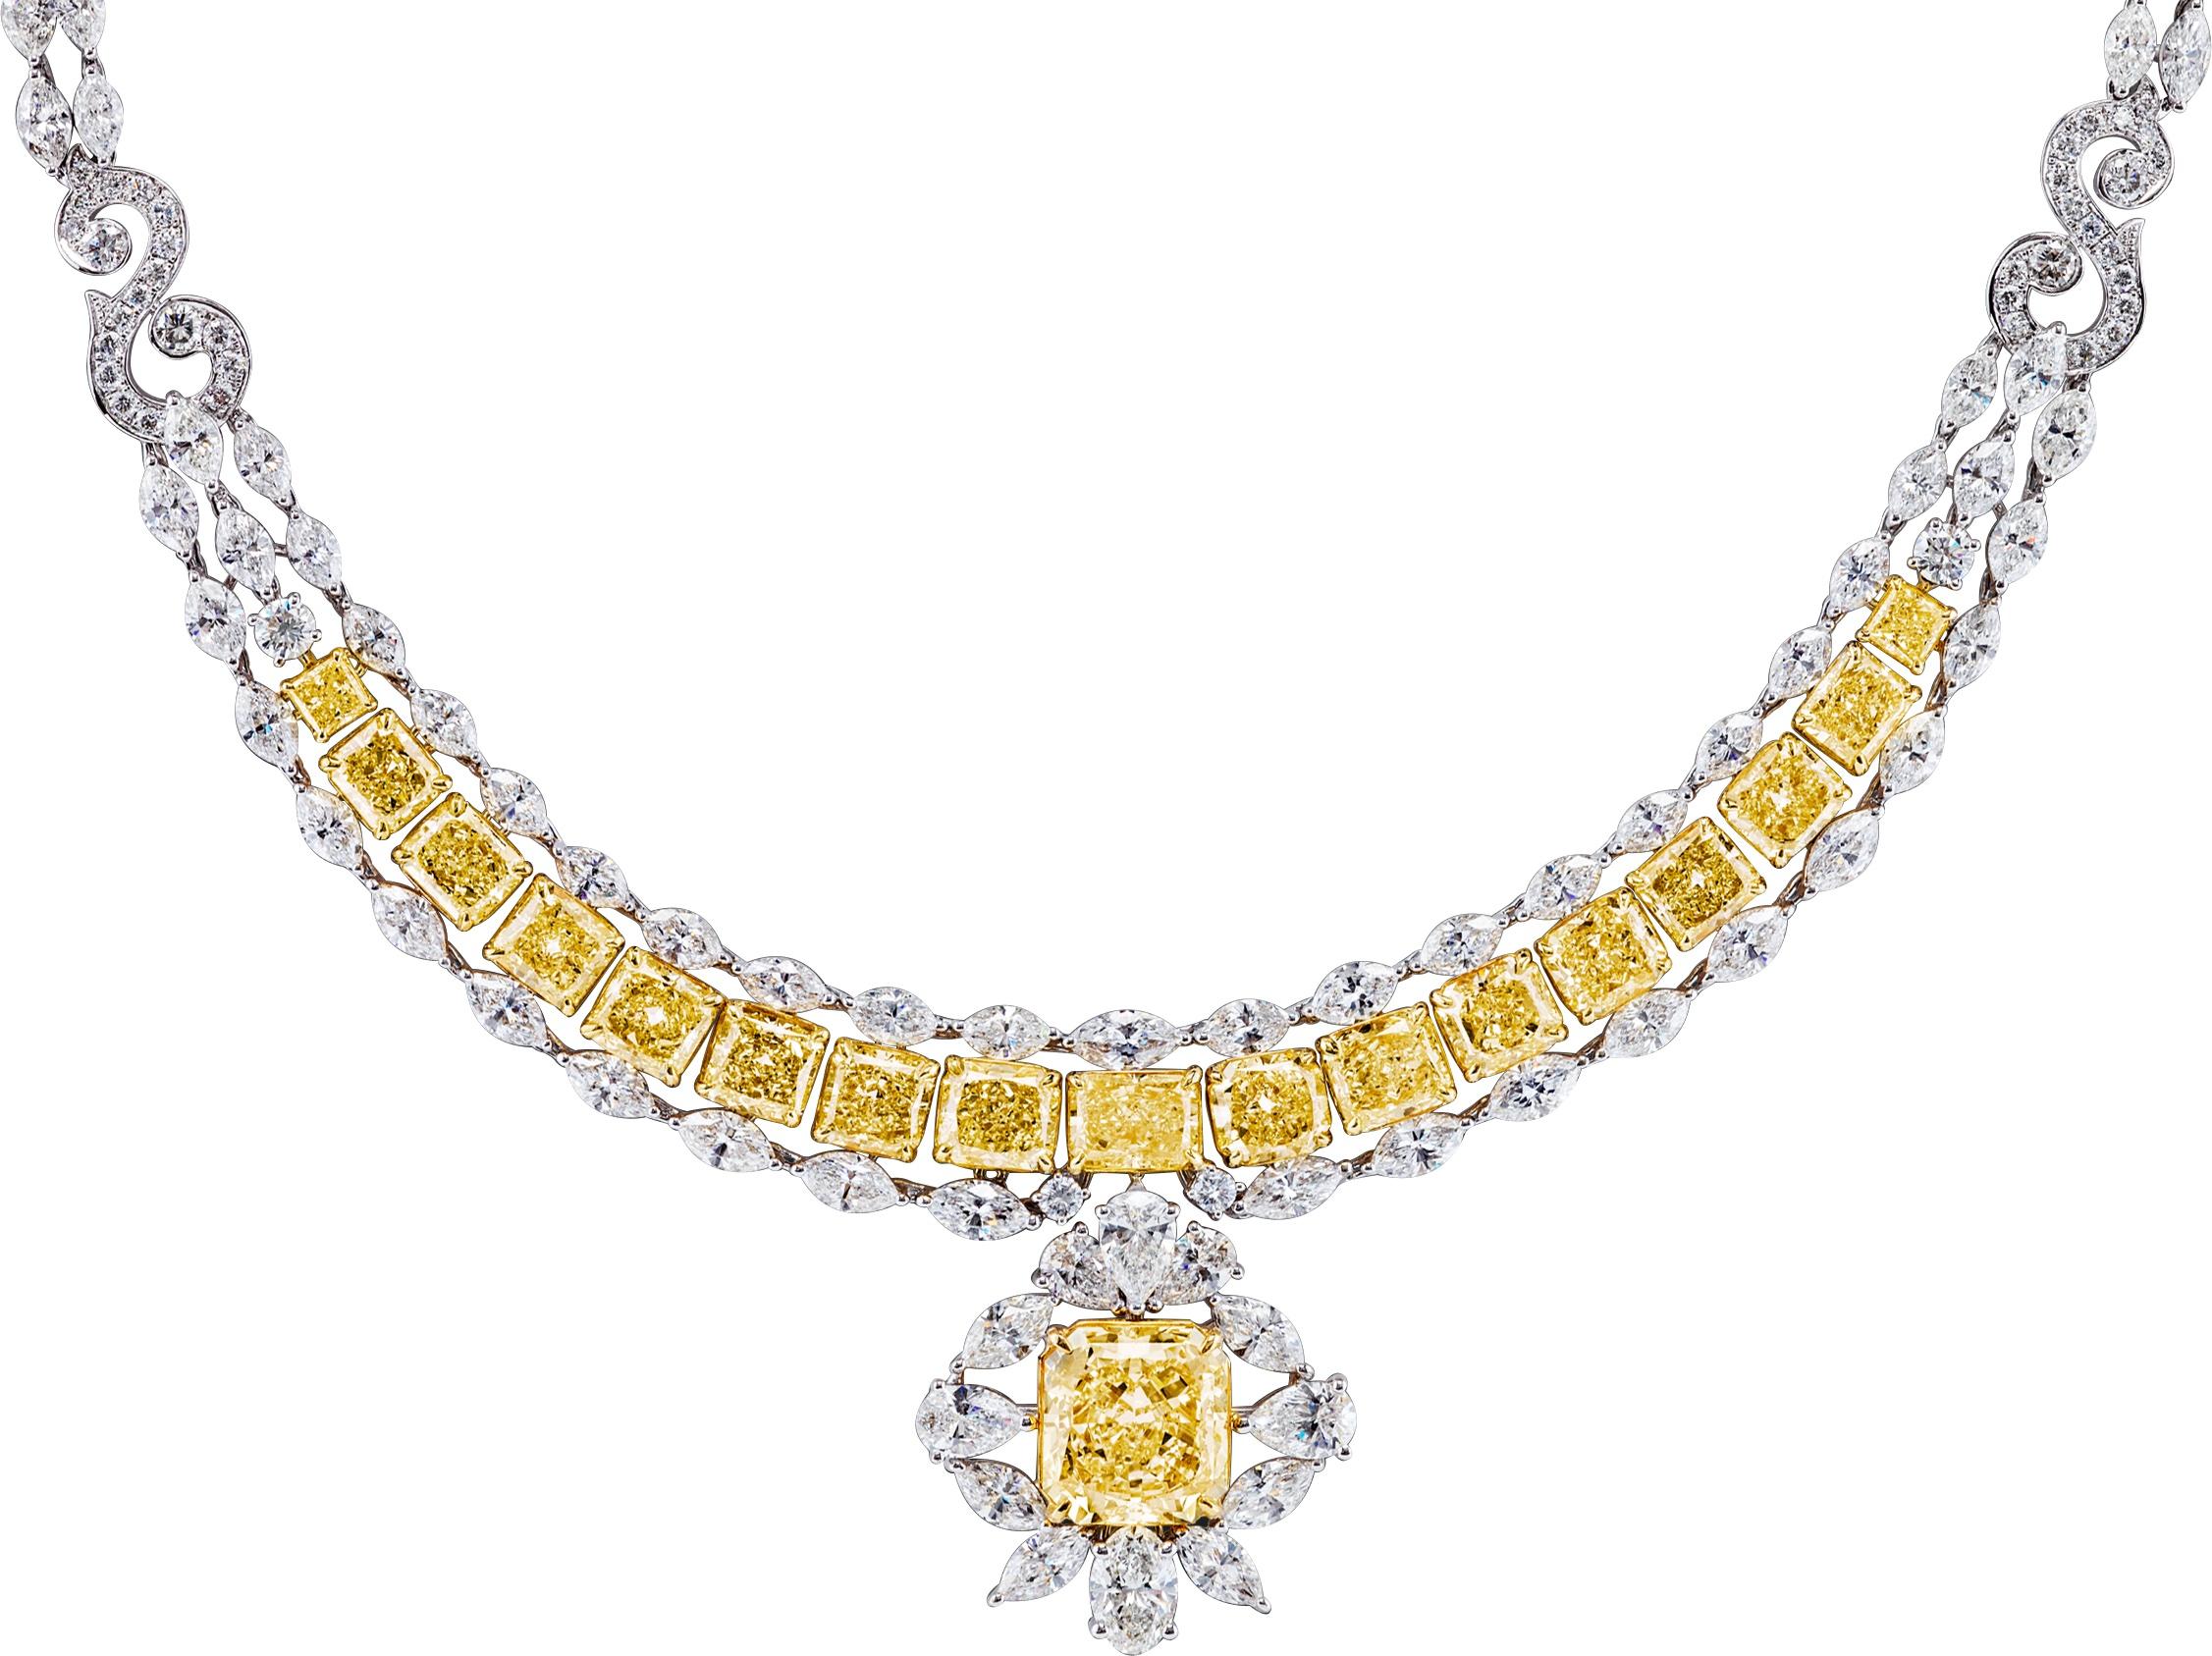 A true masterpiece, sourced with the finest raw materials nature has to offer, this exquisite diamond necklace embodies the pinnacle of luxury. Set with over 50 carats of natural diamonds and 18k solid white and yellow gold. Over half a year of